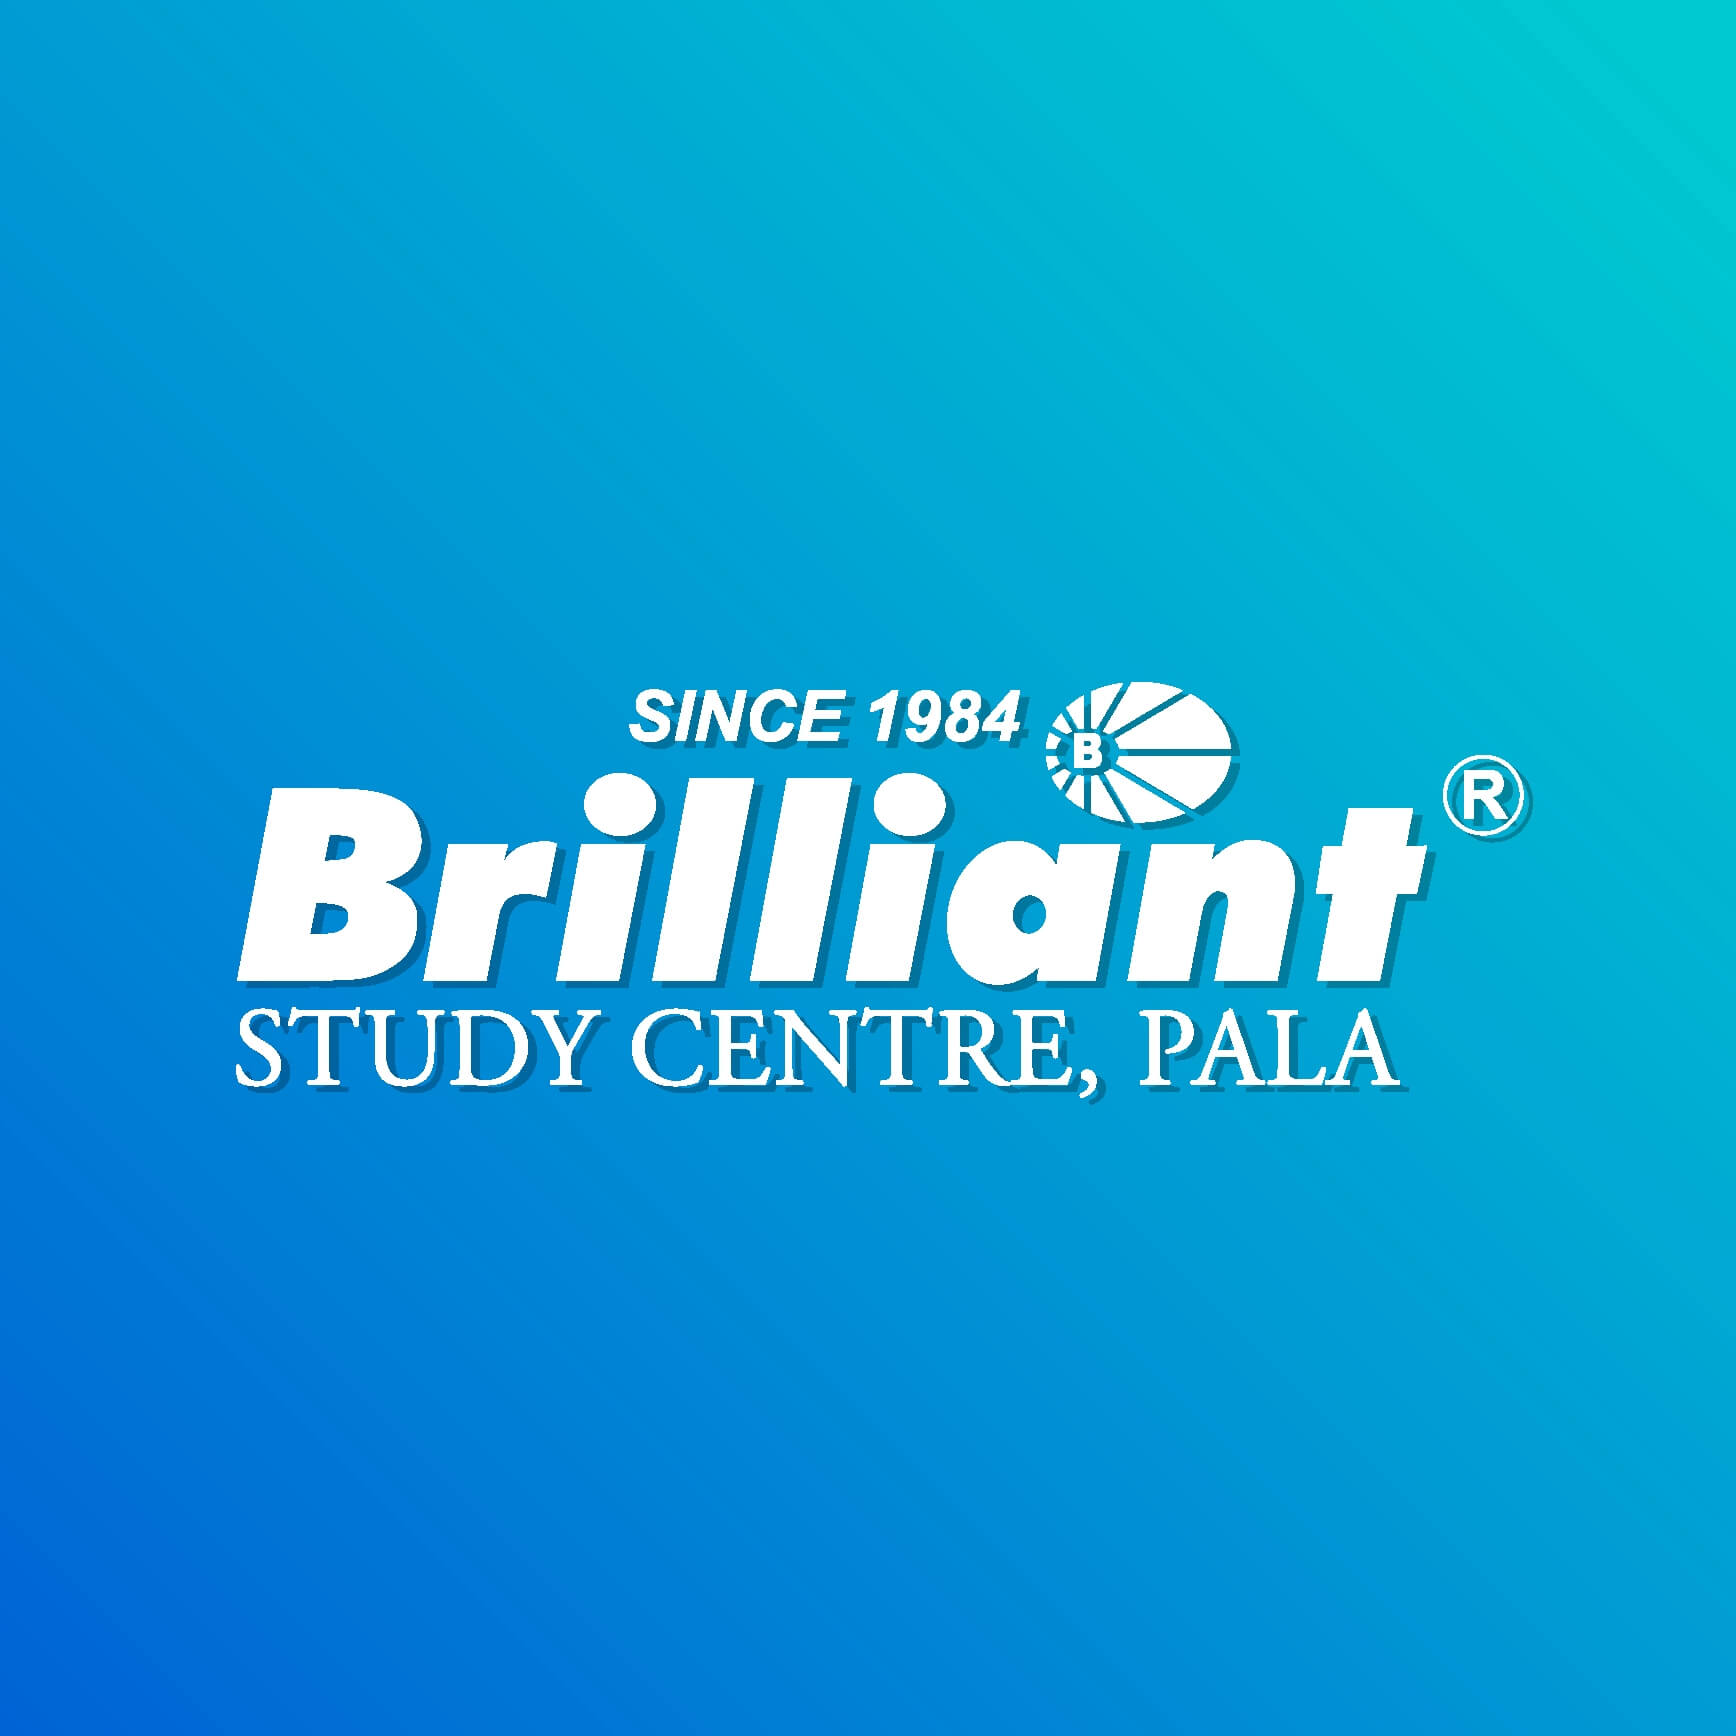 NEET JEE Entrance Coaching Centre | Brilliant Study Centre Pala | free Classified | Free Advertising | free classified ads